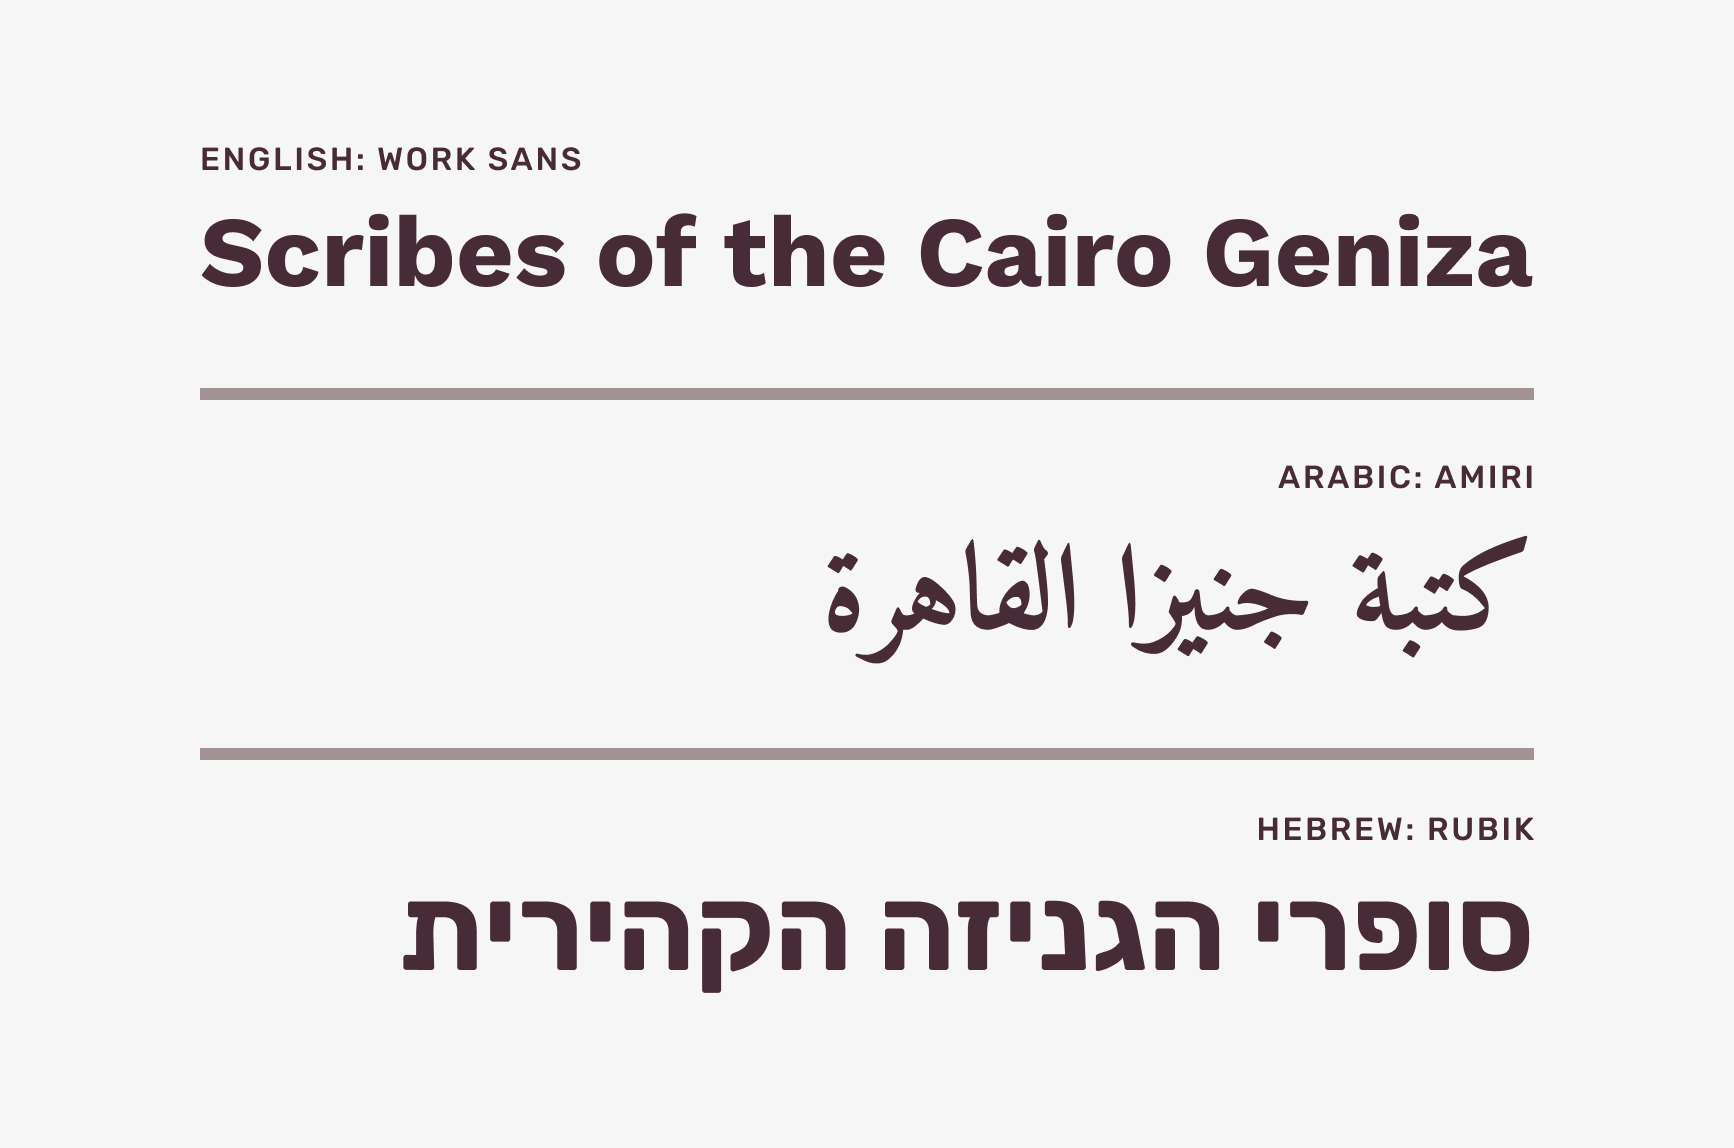 Three font examples that read “Scribes of the Cairo Geniza” in English, Arabic, and Hebrew.